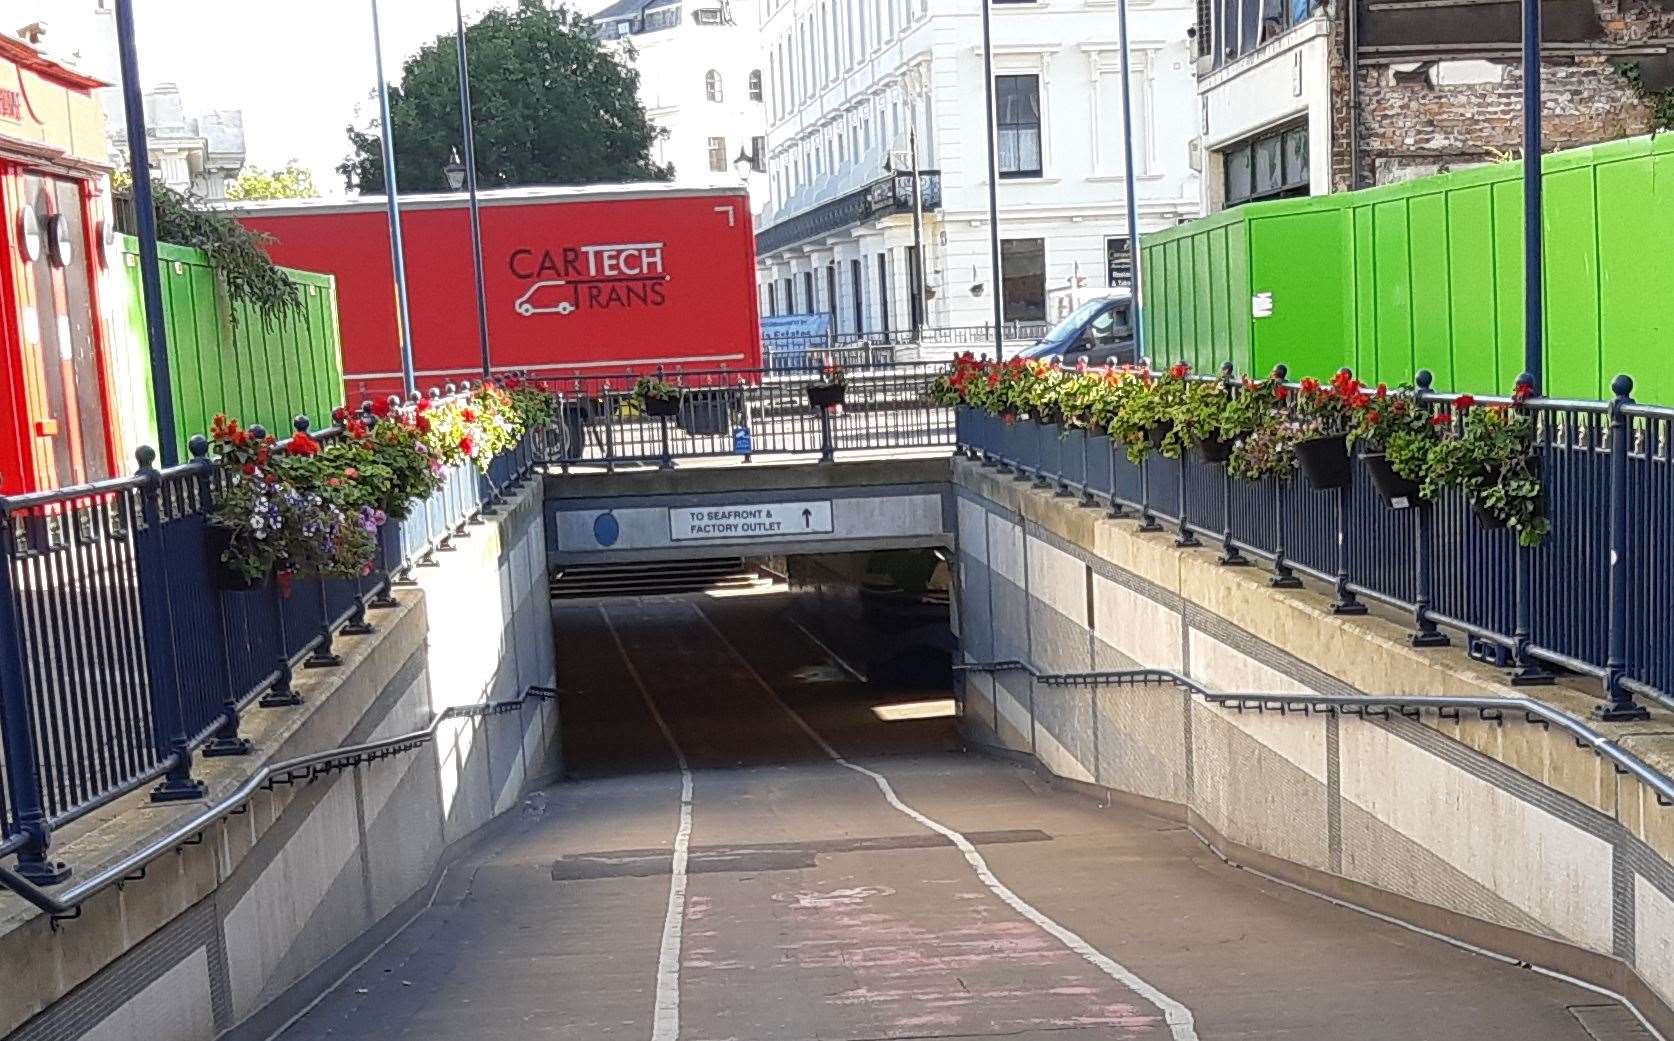 The underpass where the mugging took place